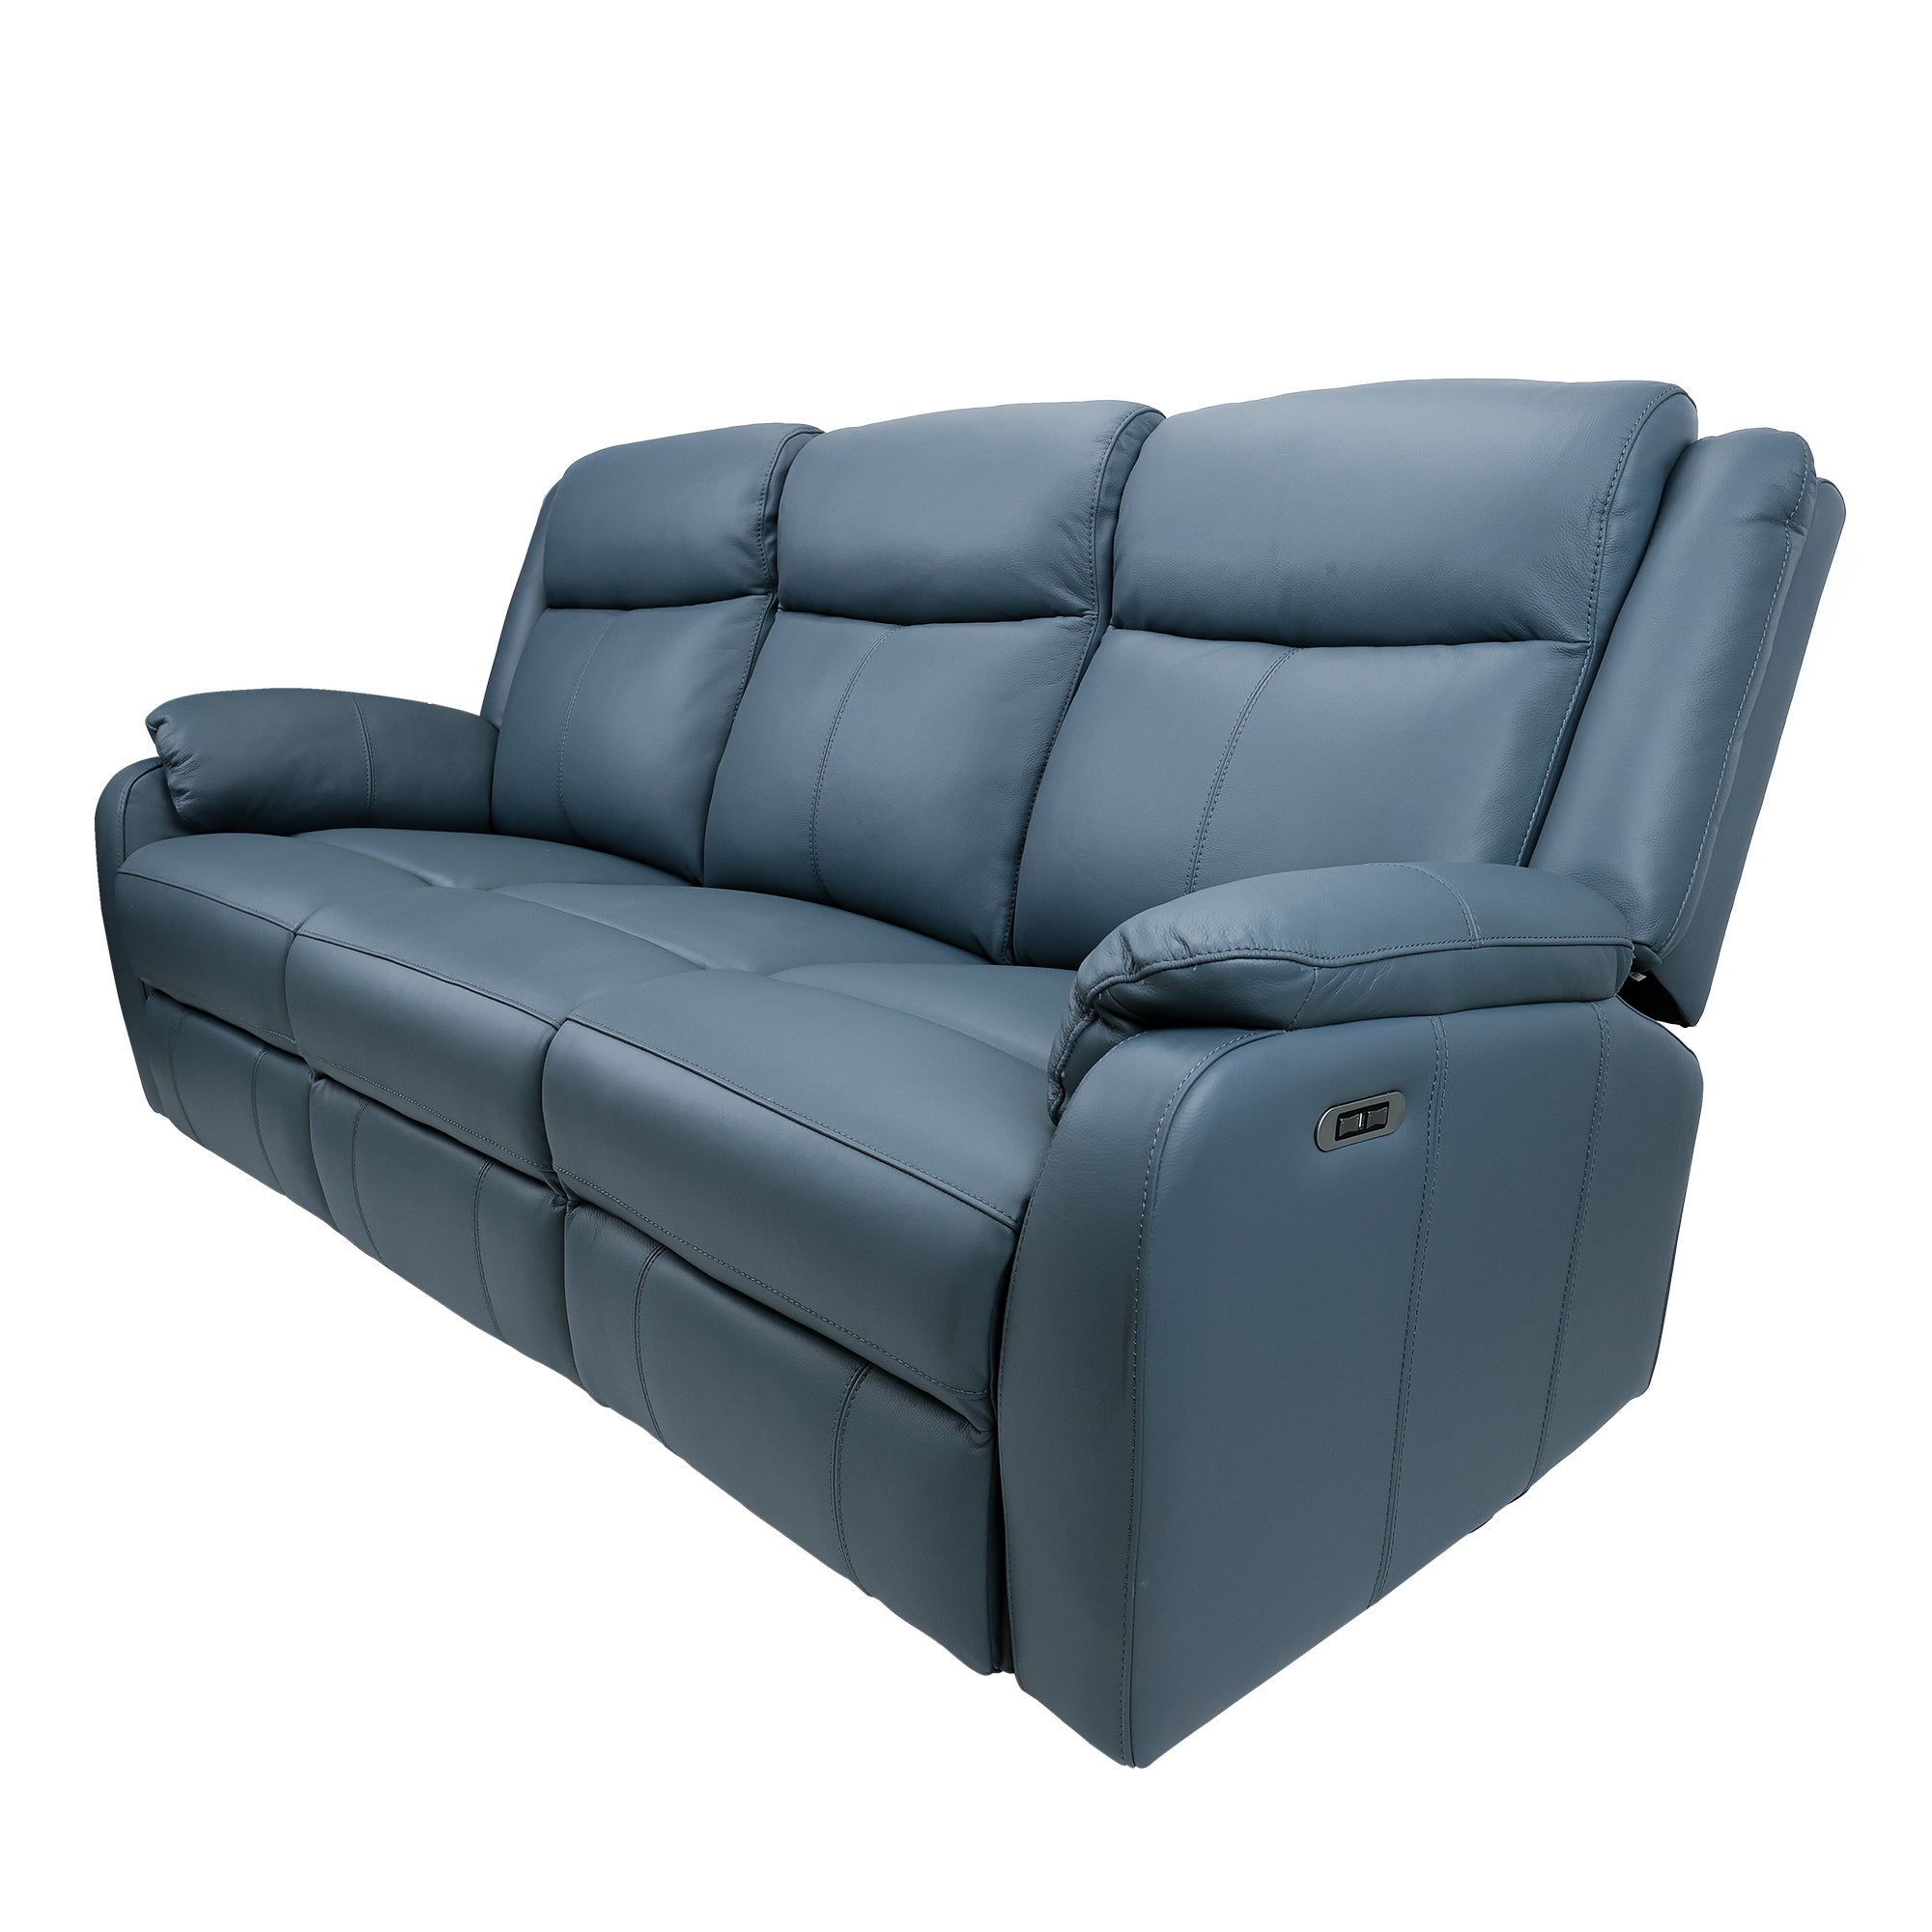 Blue 3-Seater Electric Recliner Leather Lounge w/ USB Charger